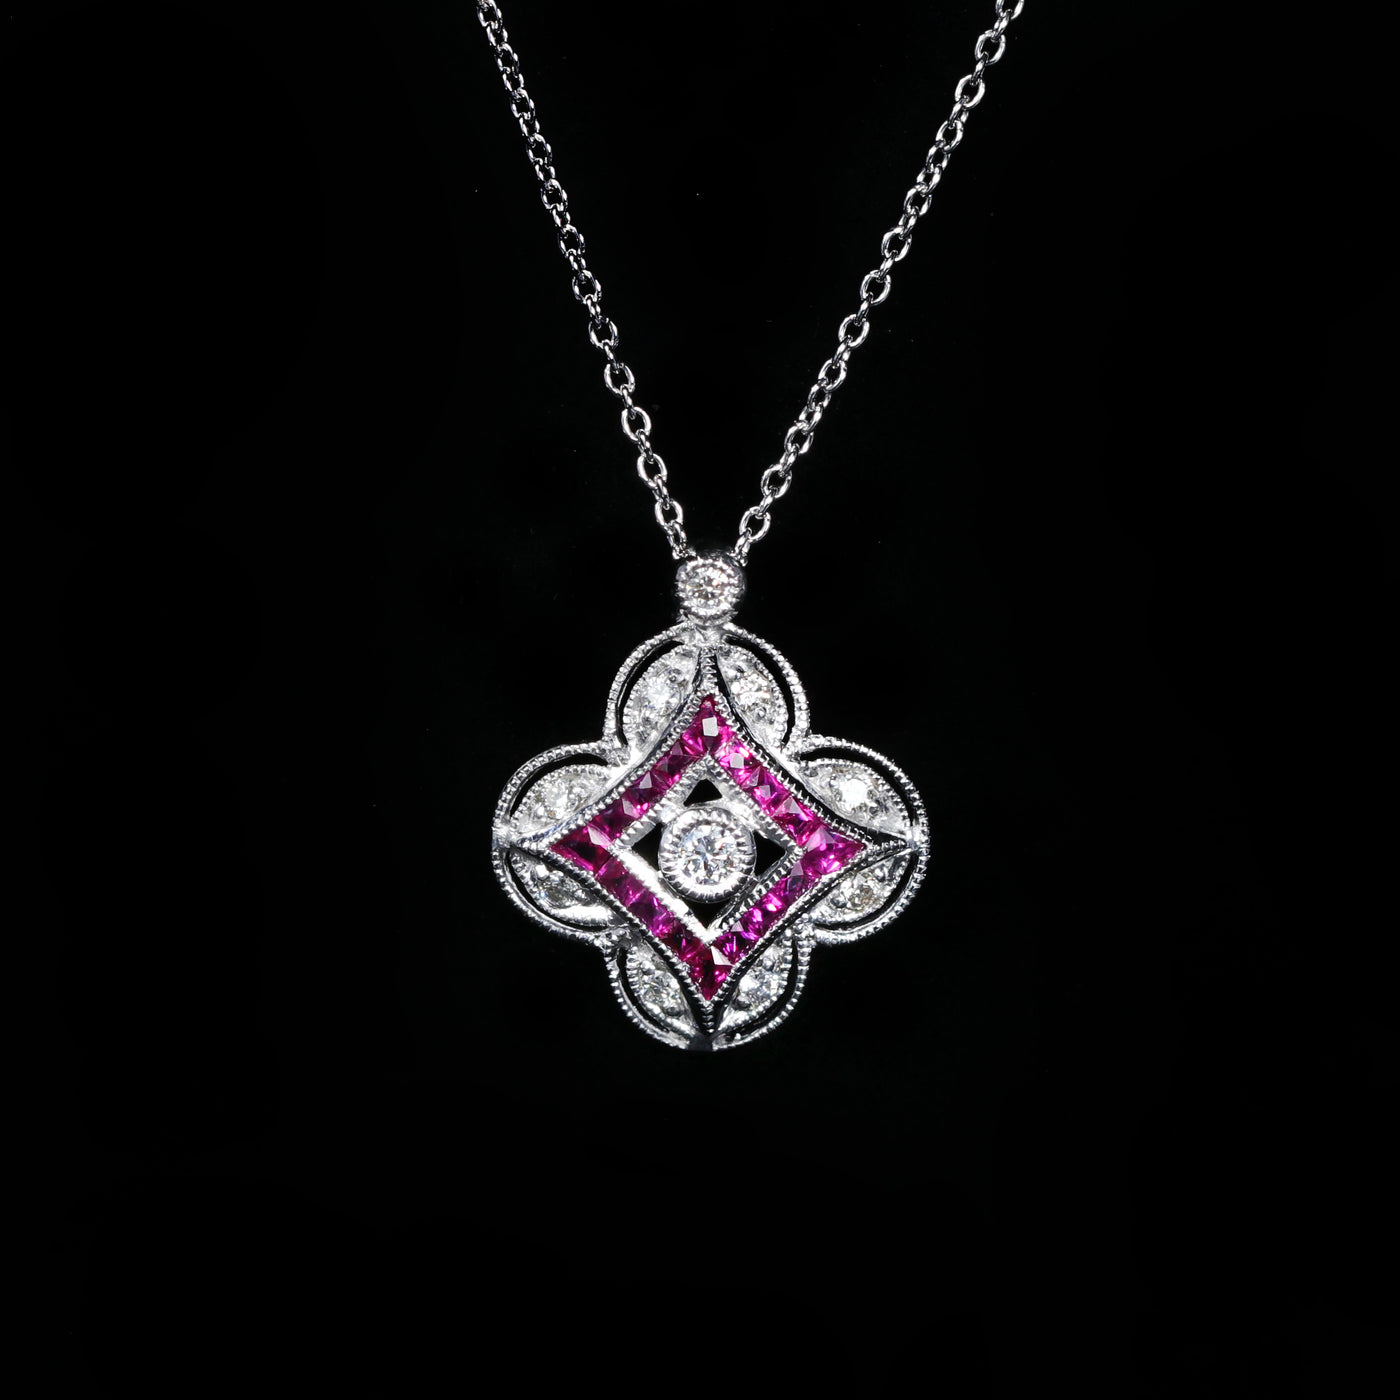 14K White Gold Diamond and Ruby Necklace